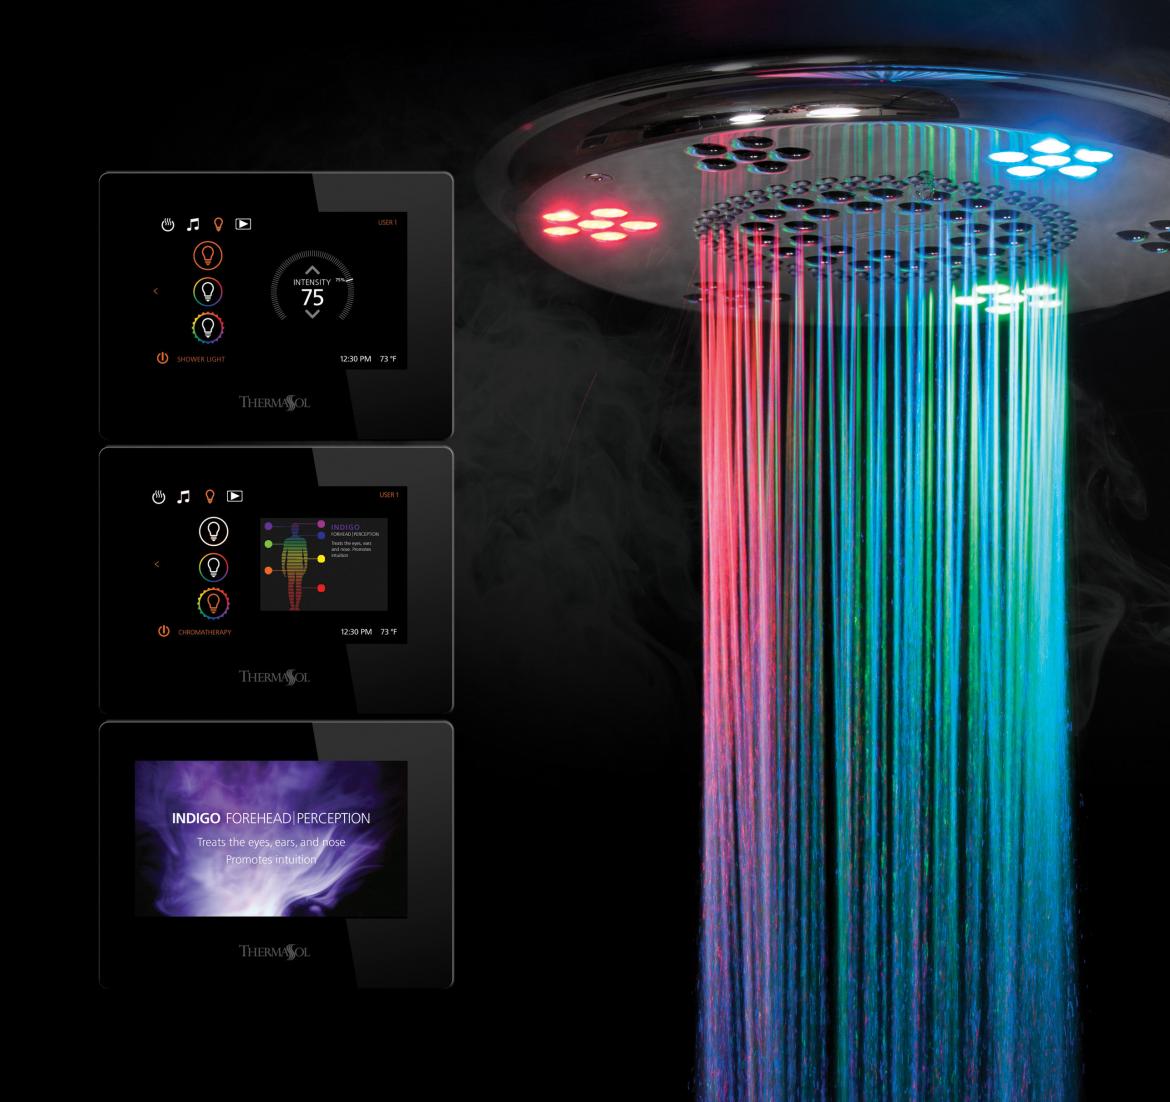 ThermaSol Shower Kit - The Wellness Shower Package with 10" ThermaTouch